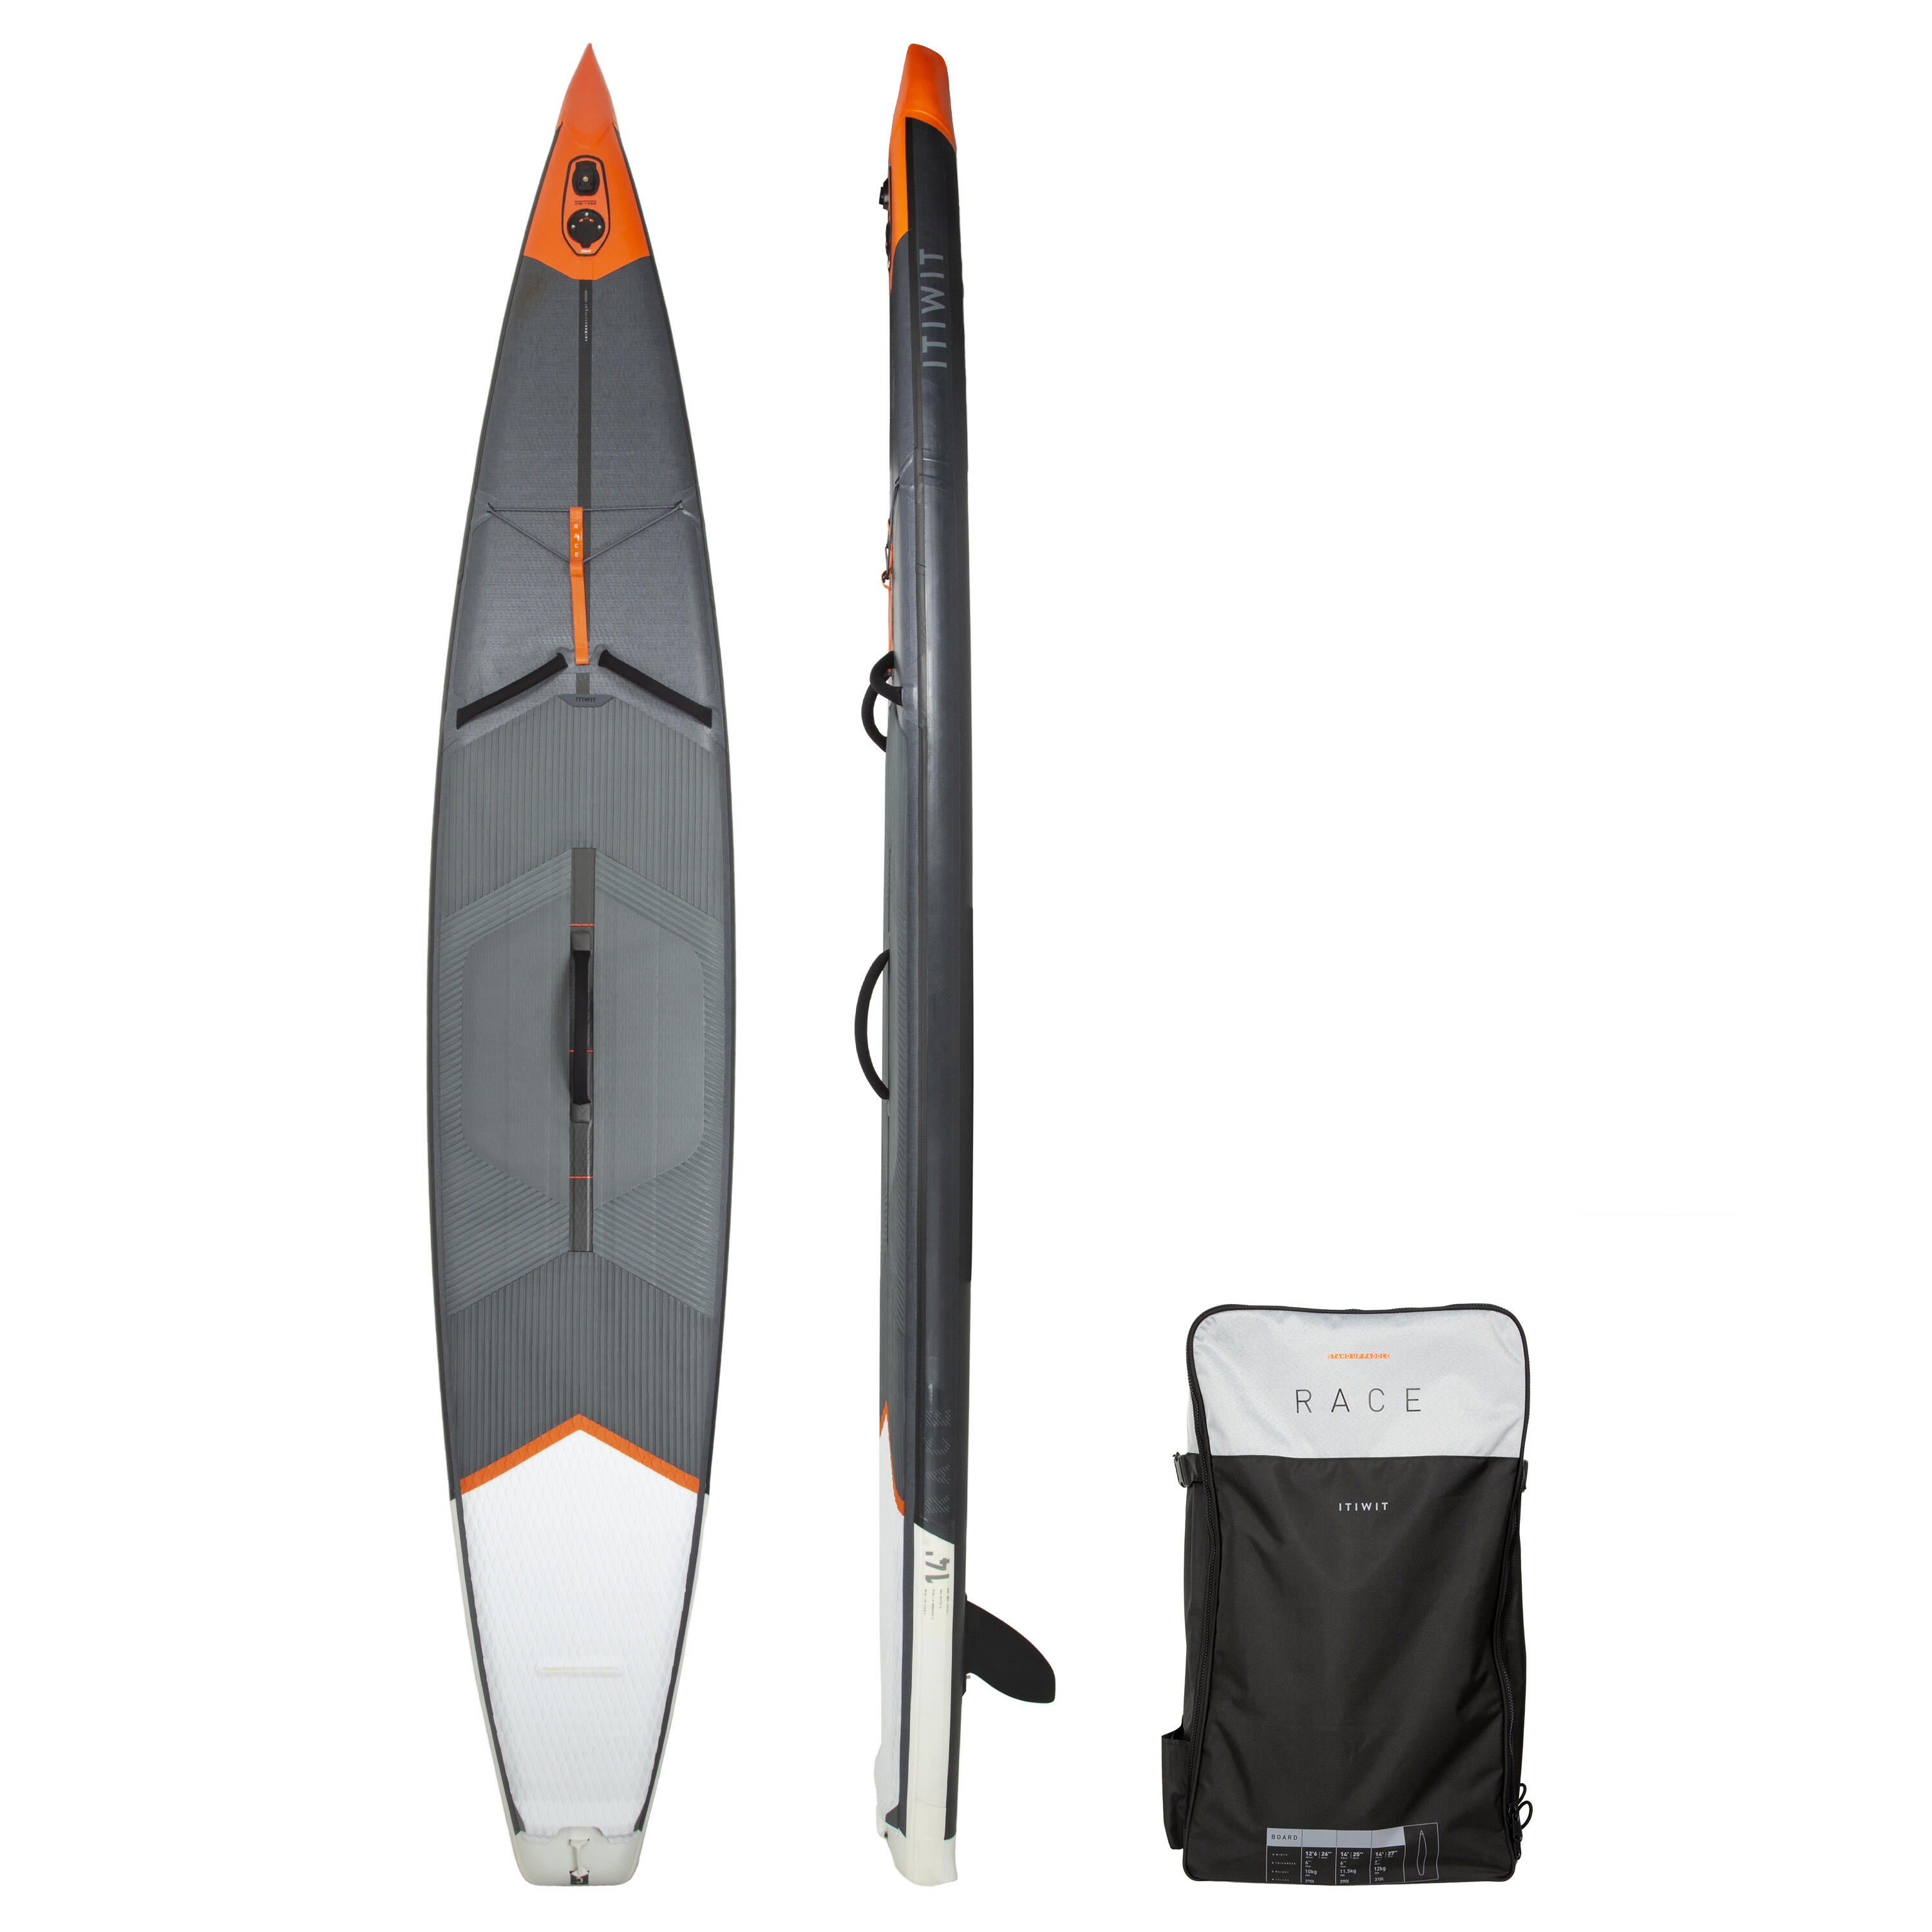 ITIWIT Inflatable stand-up paddle board Race 14'27" - R500